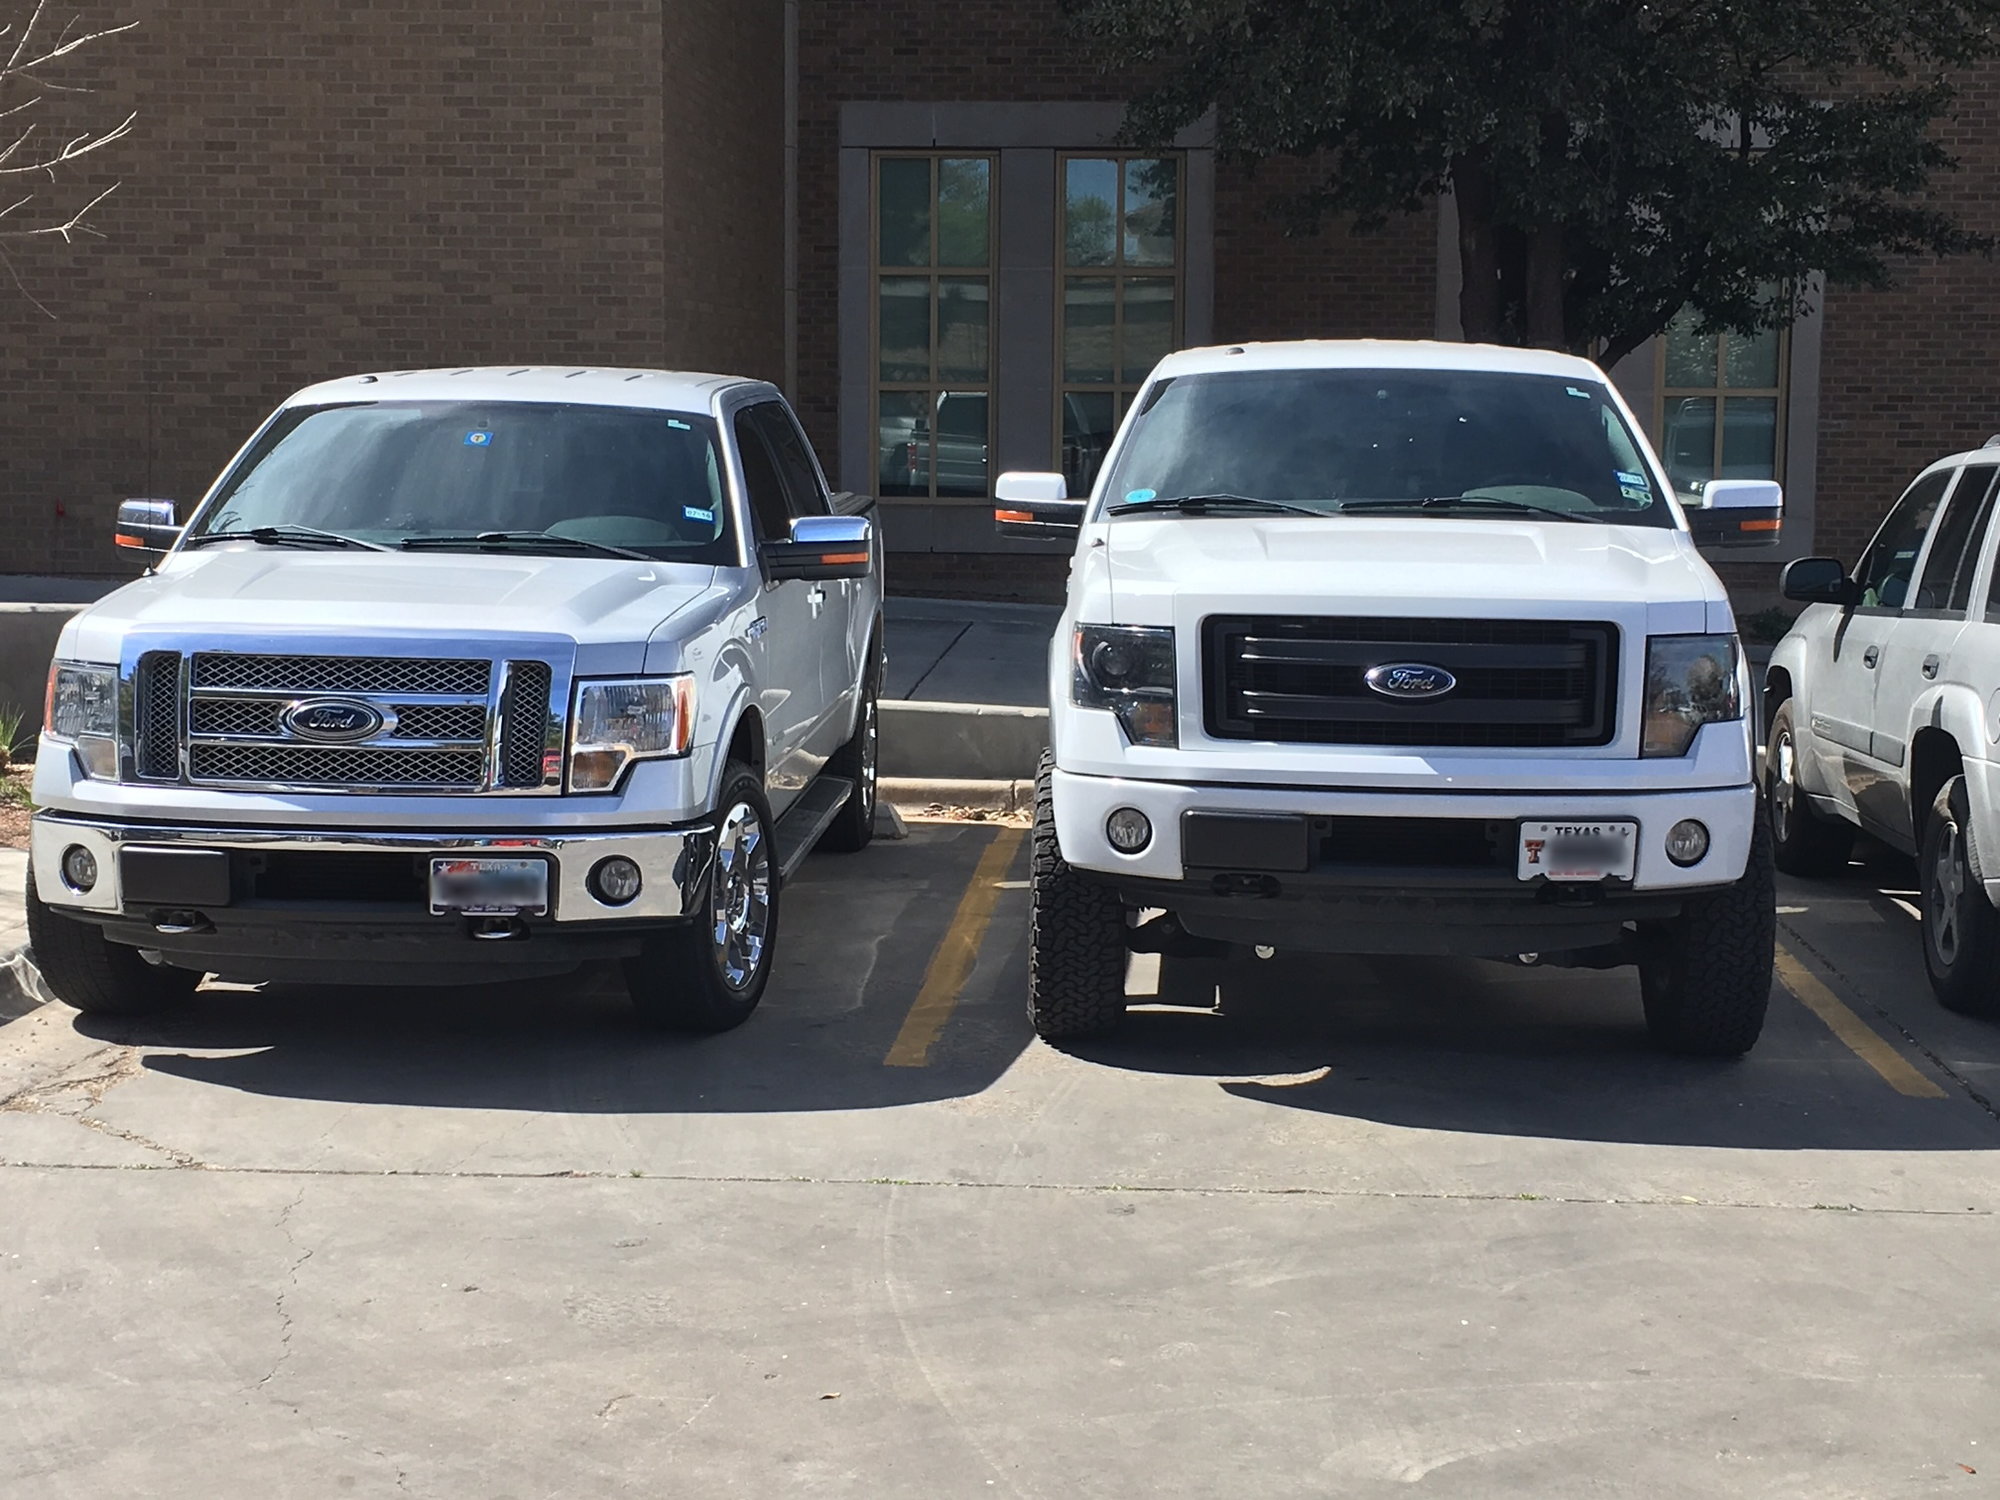 4 inch lift or 6 inch lift - Pro's and Con's - Page 21 - Ford F150 6 Inch Lift Vs 4 Inch Lift